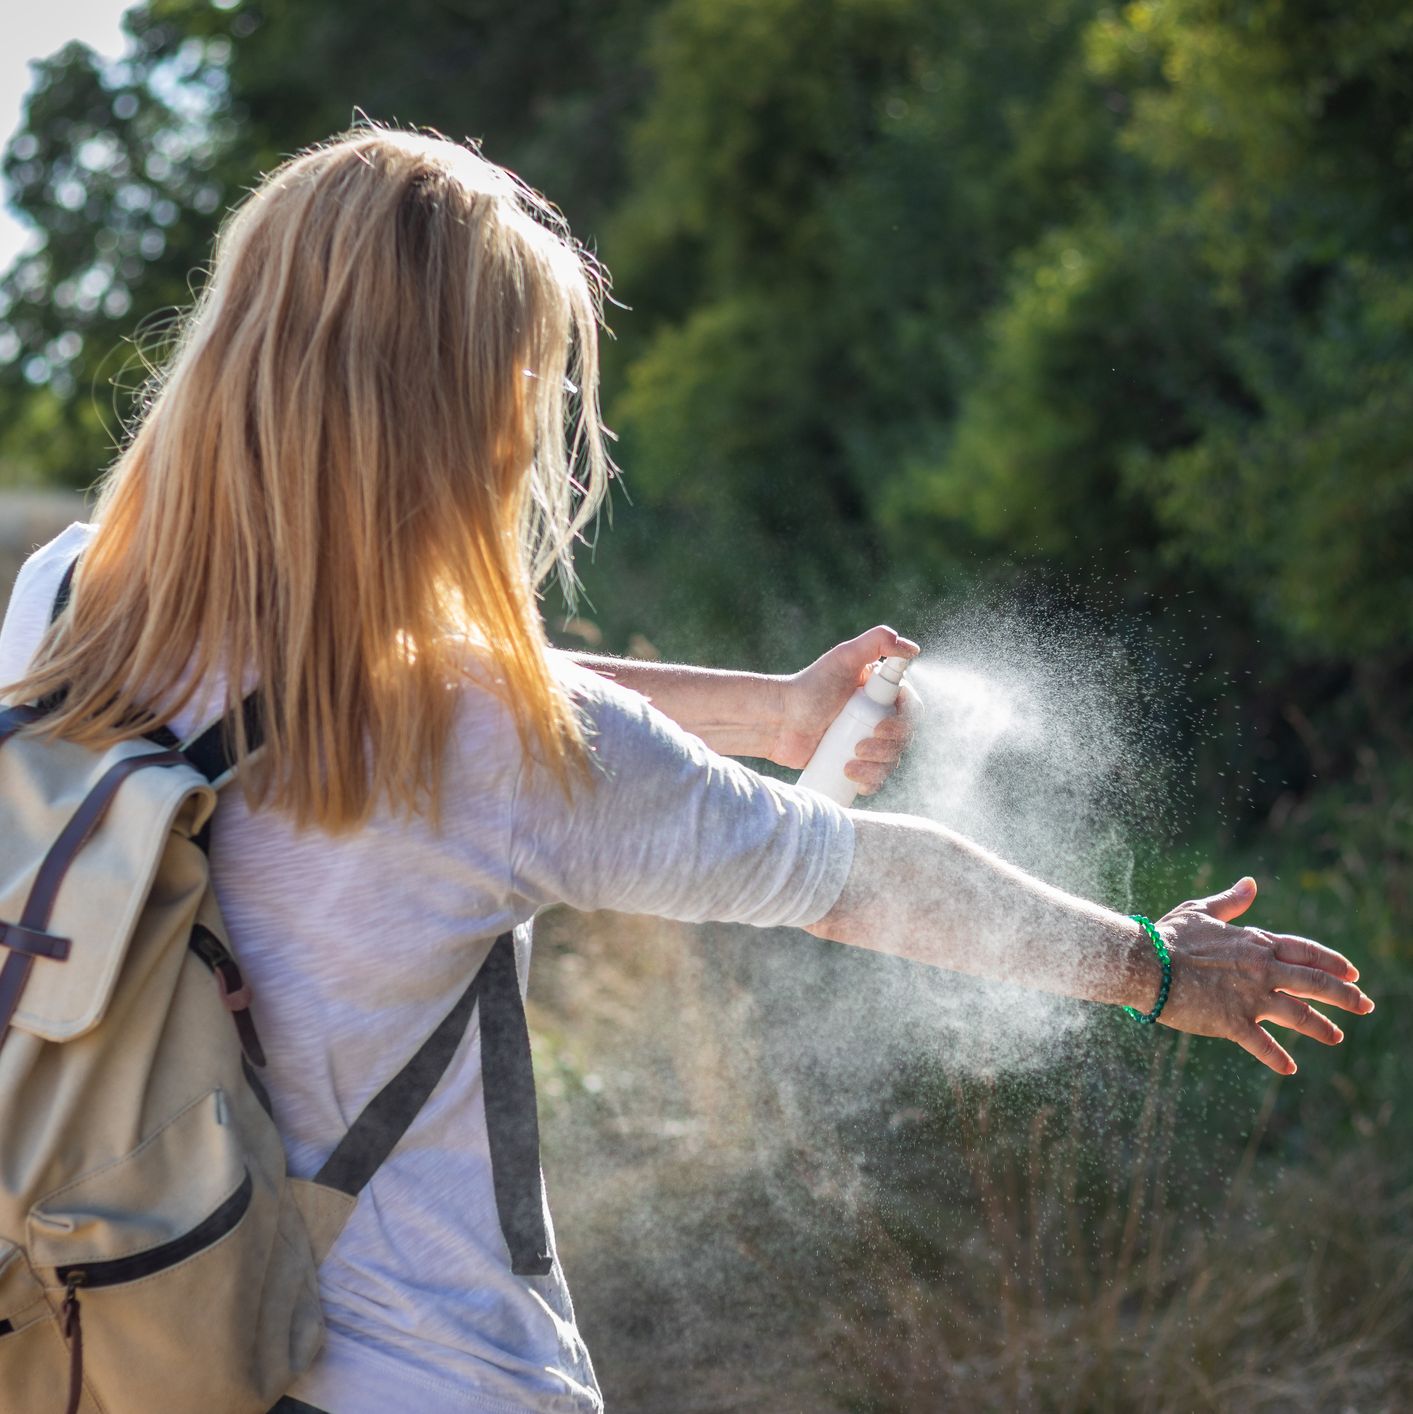 woman tourist applying mosquito repellent on hand during hike in nature insect repellent